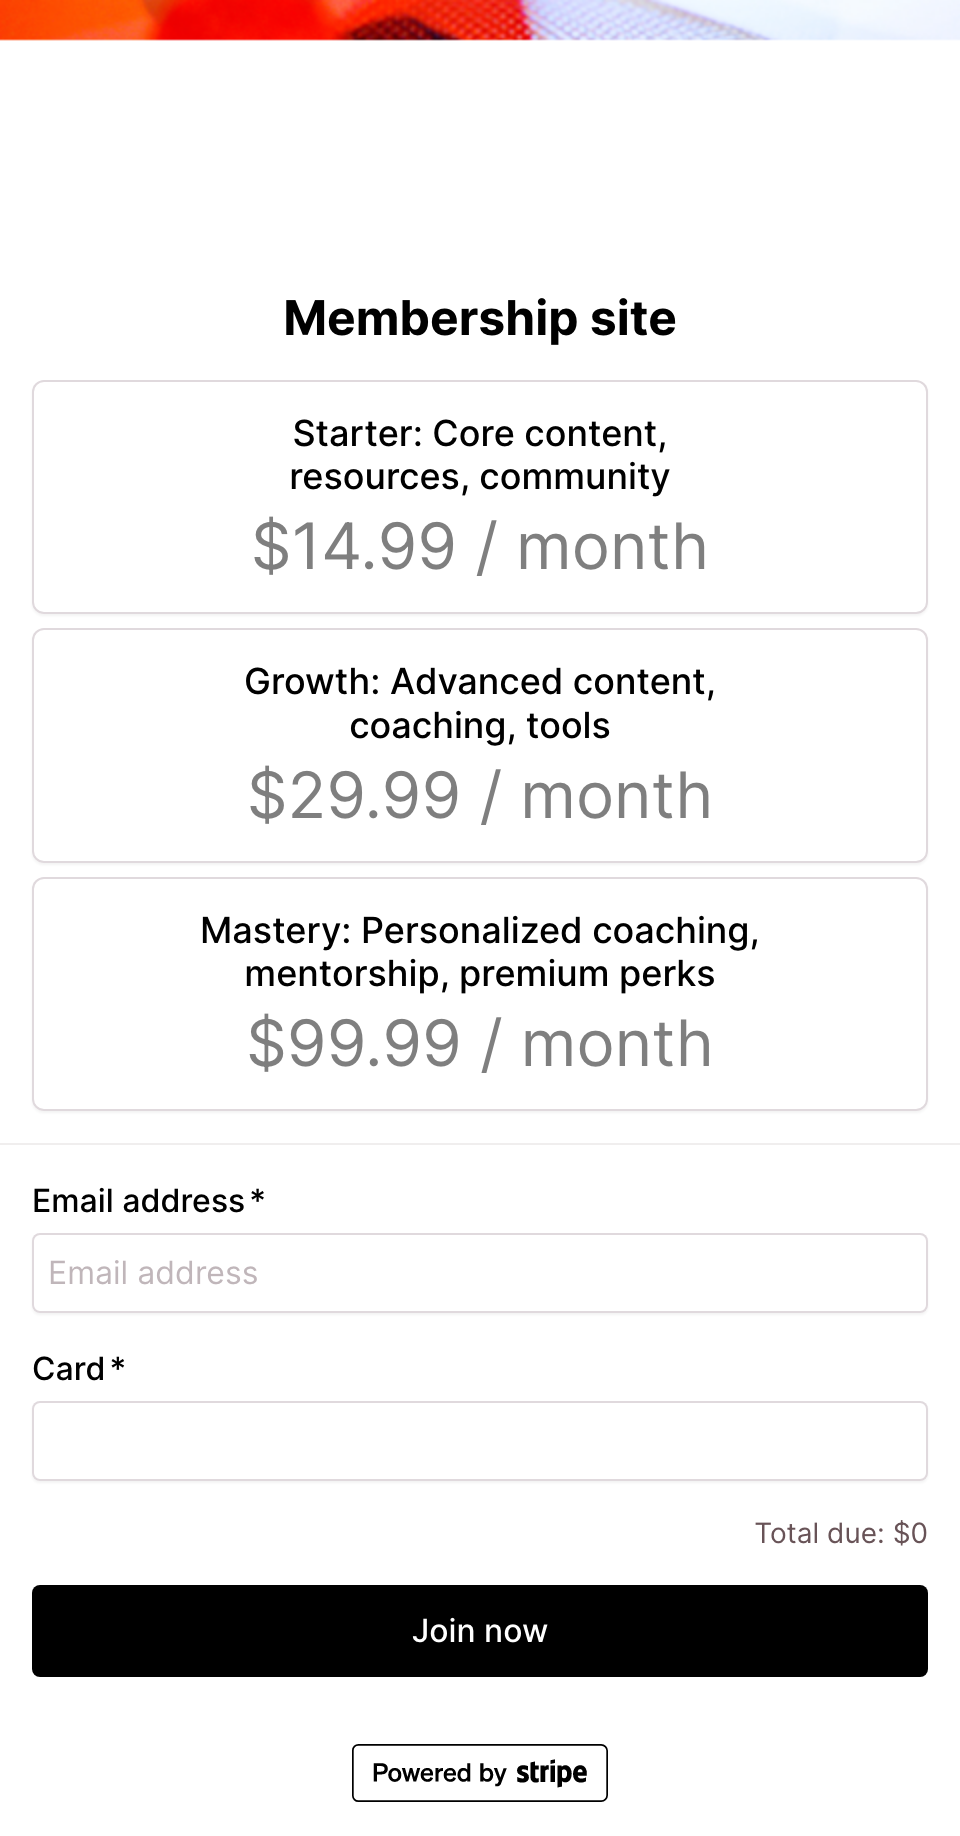 Membership site - tiered pricing model - Stripe subscription